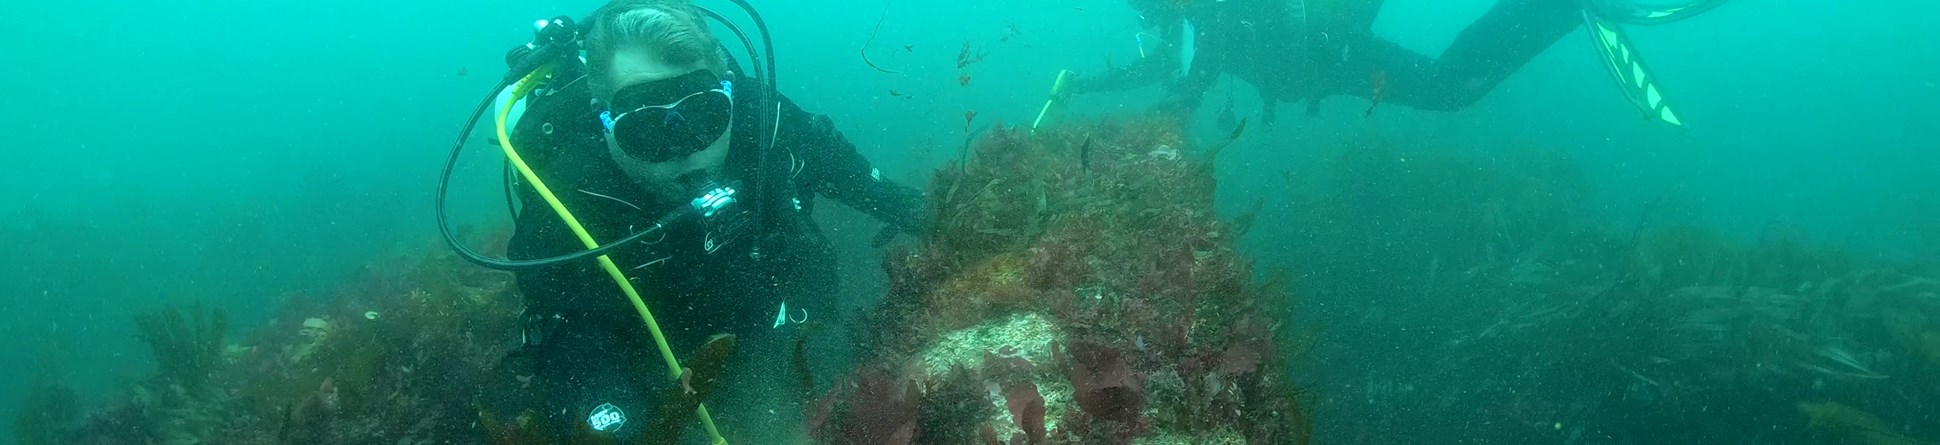 Two divers under water surveying part of a seaweed covered ship wreck on the sea floor.